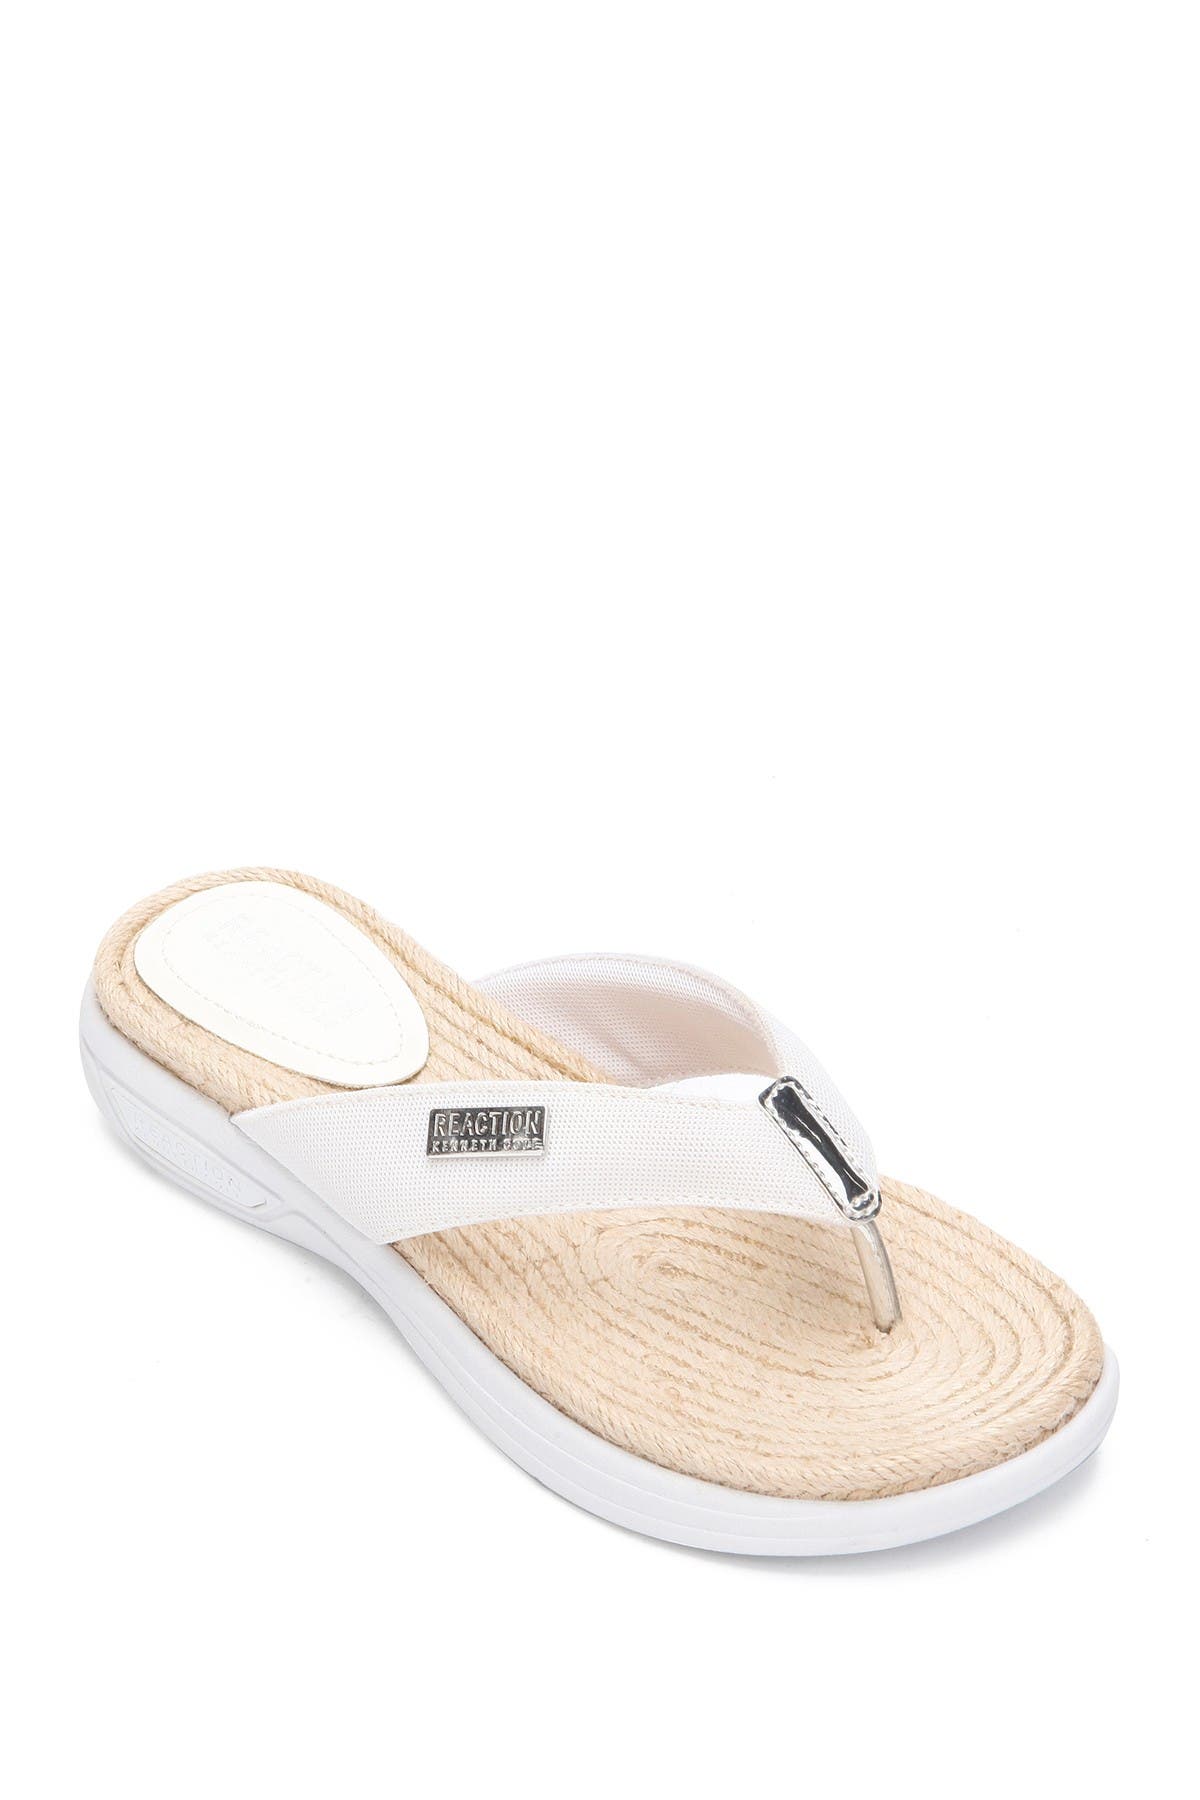 Kenneth Cole Reaction Ready Espadrille Flip-flop In White